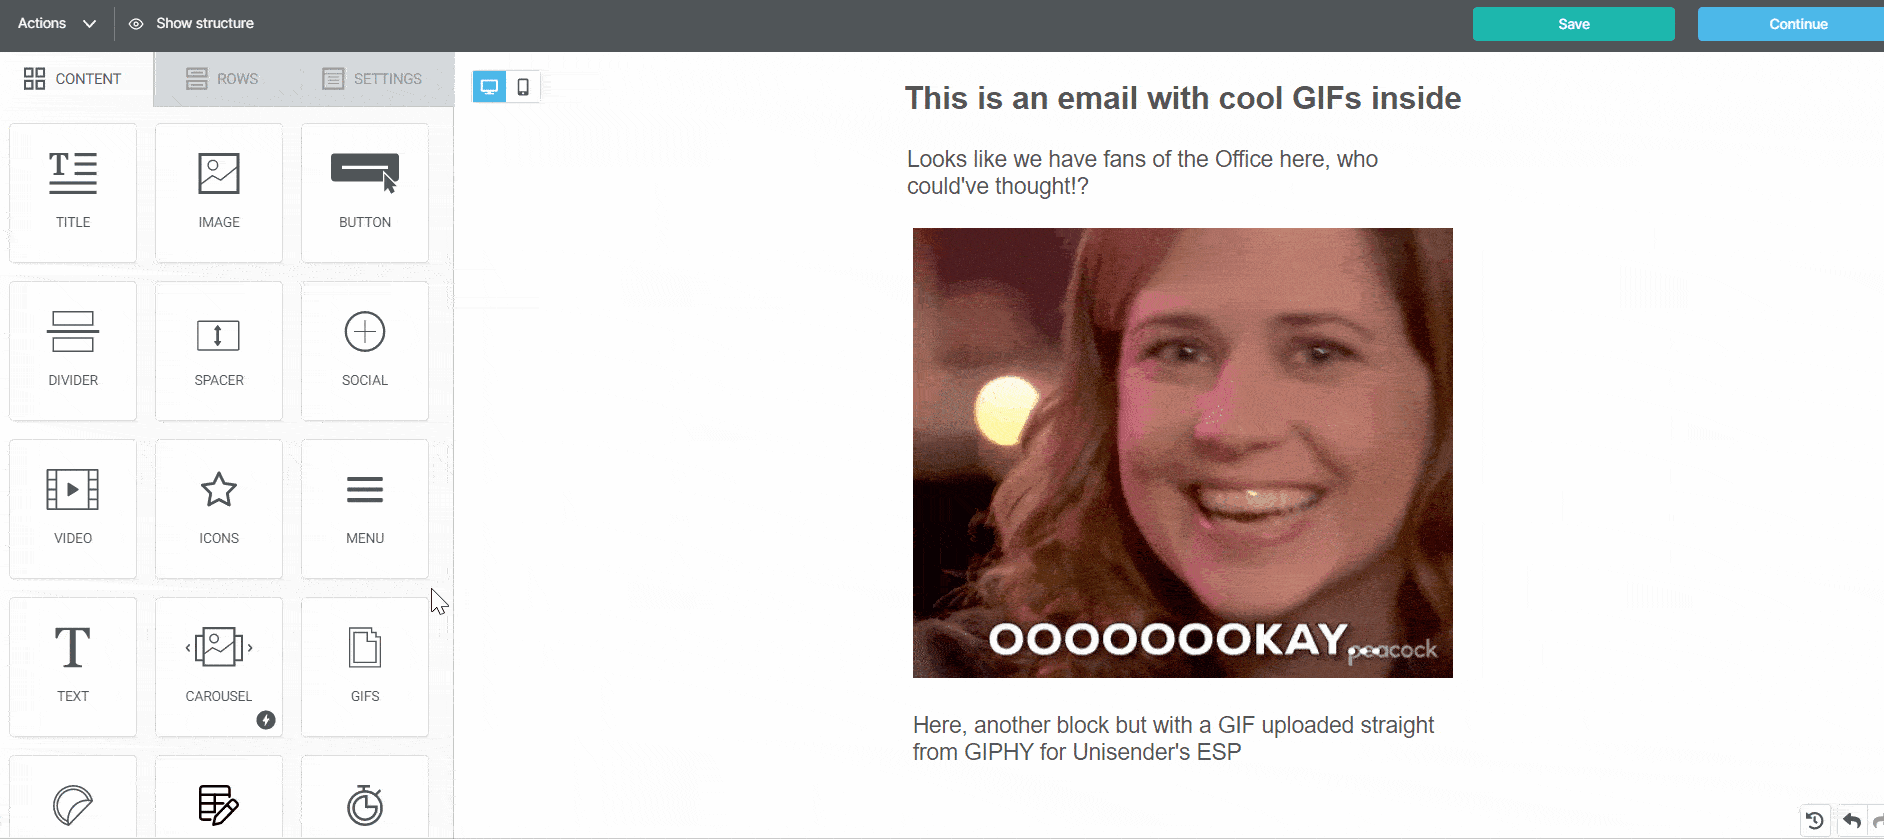 Adding GIFs from GIPHY